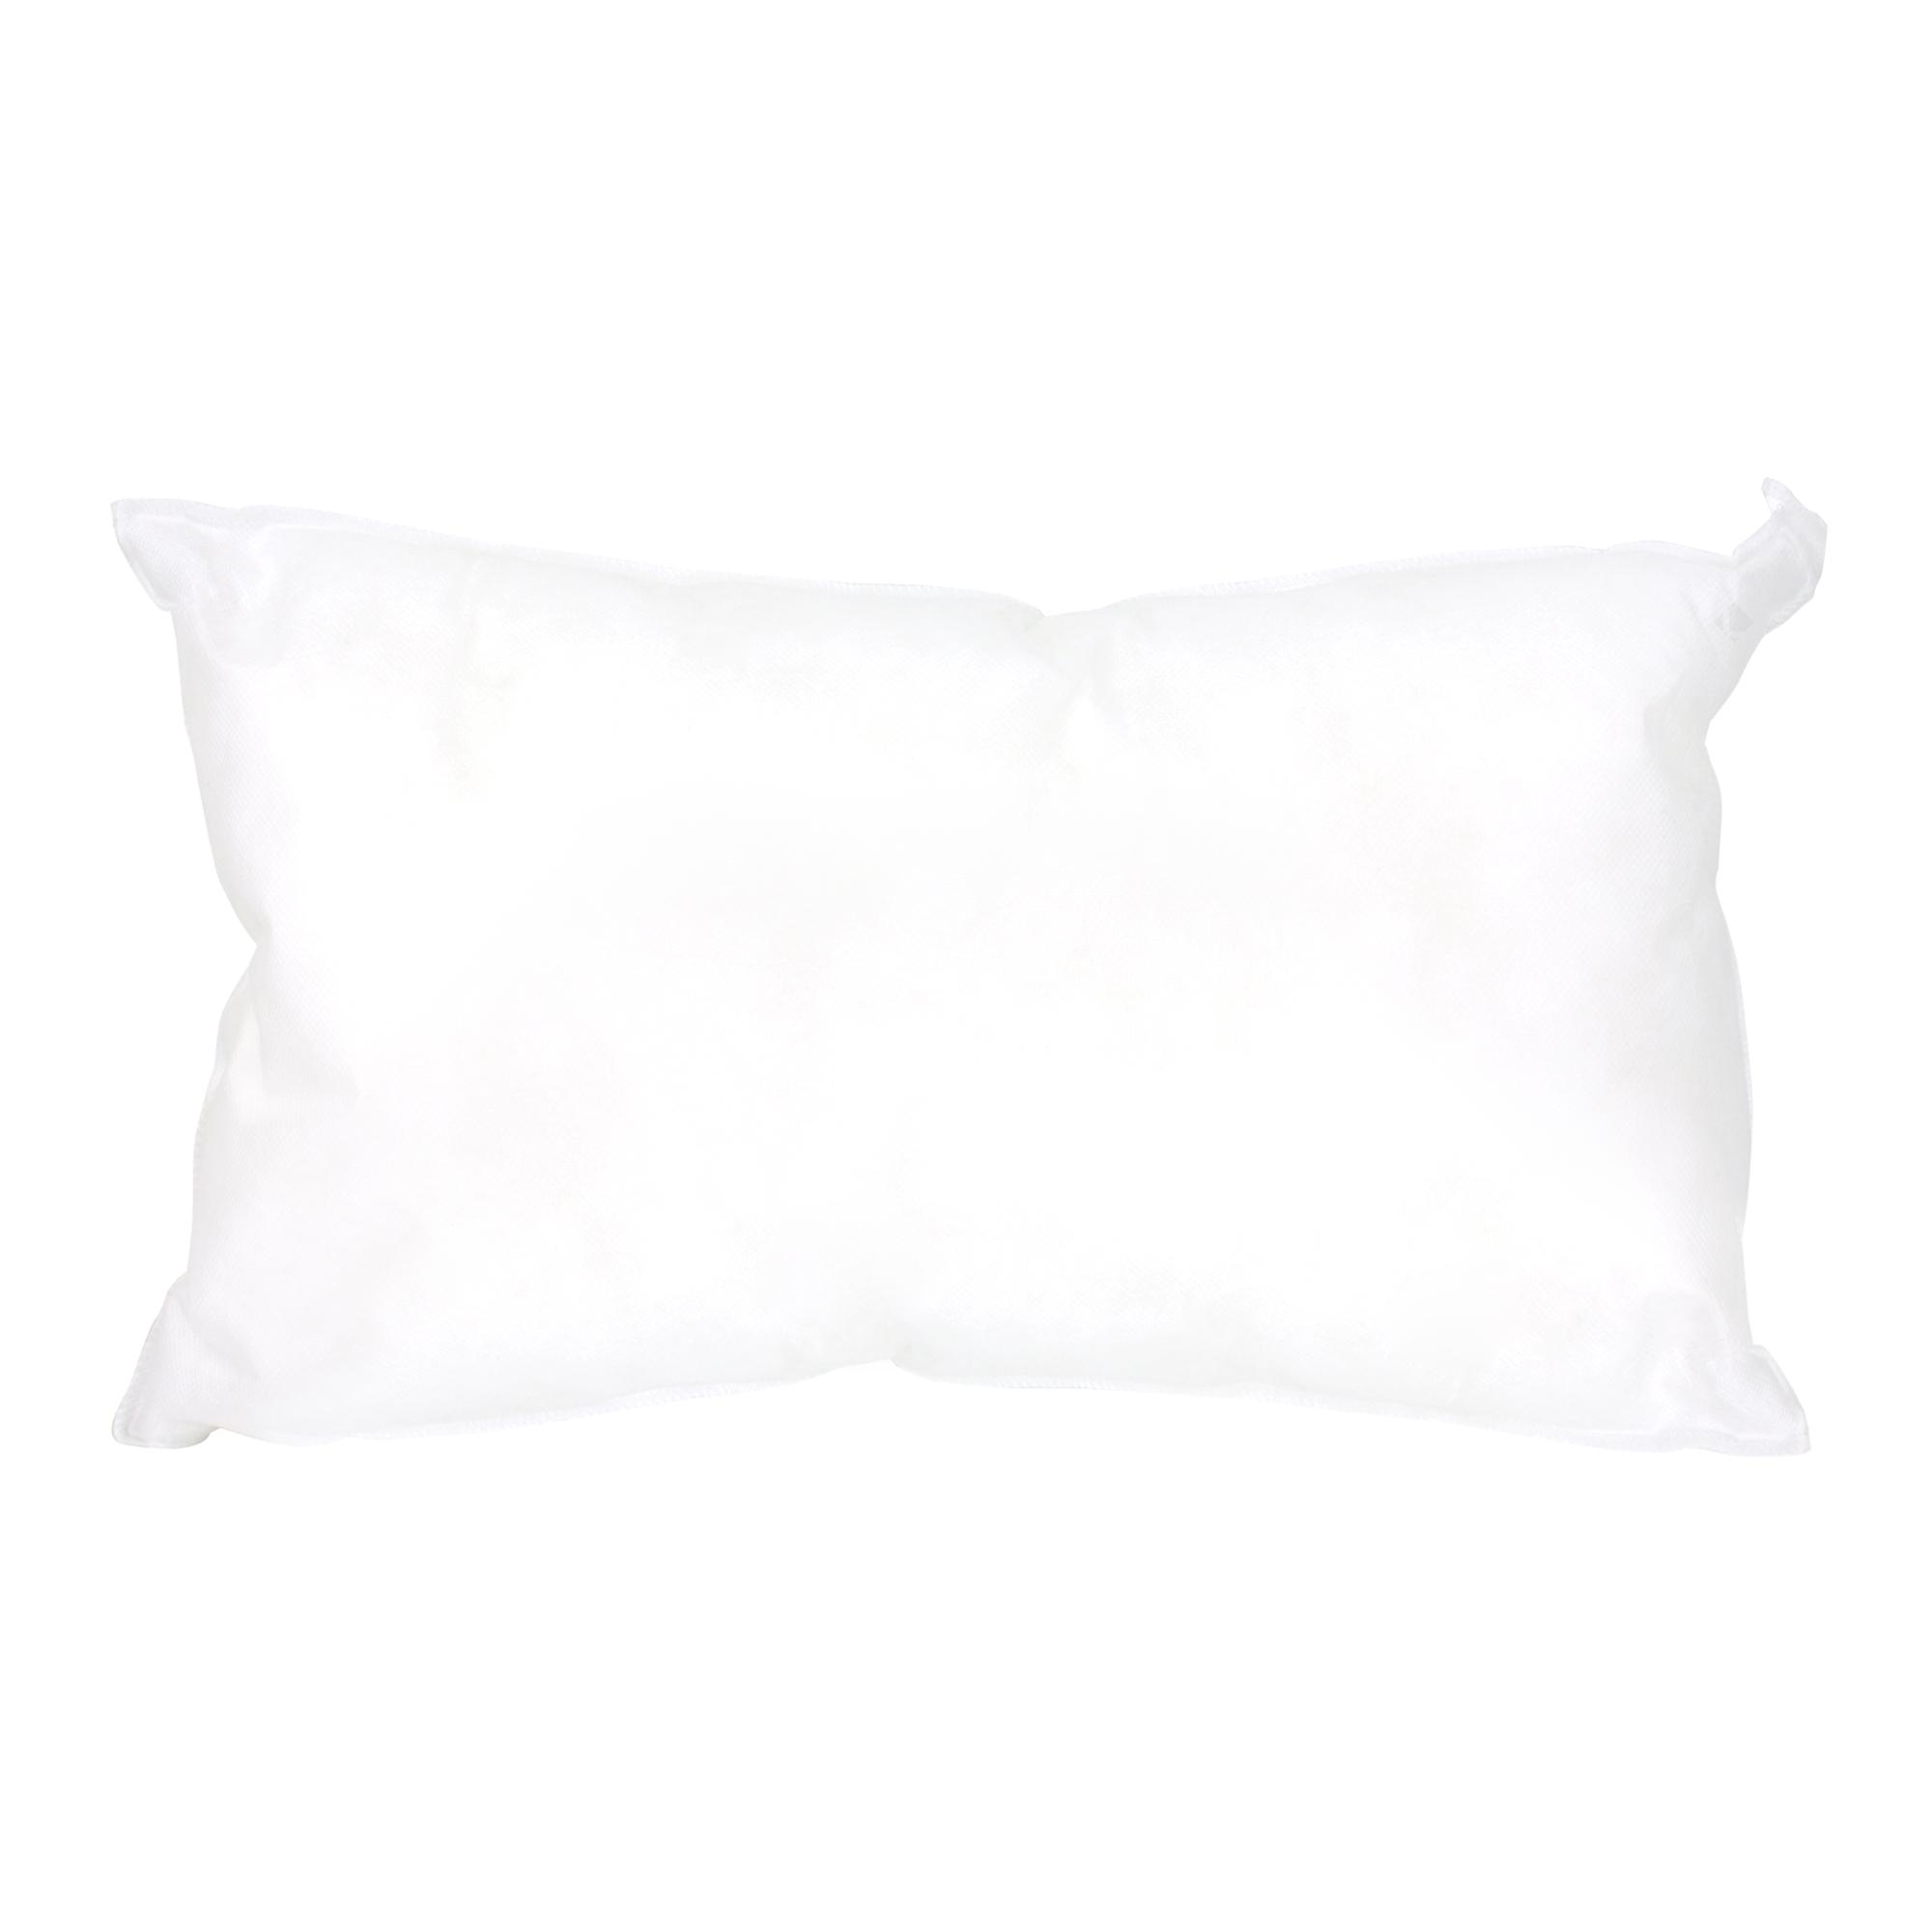 Coussin à recouvrir 55x55 cm, garnissage Fibres polyester - coussin Malin